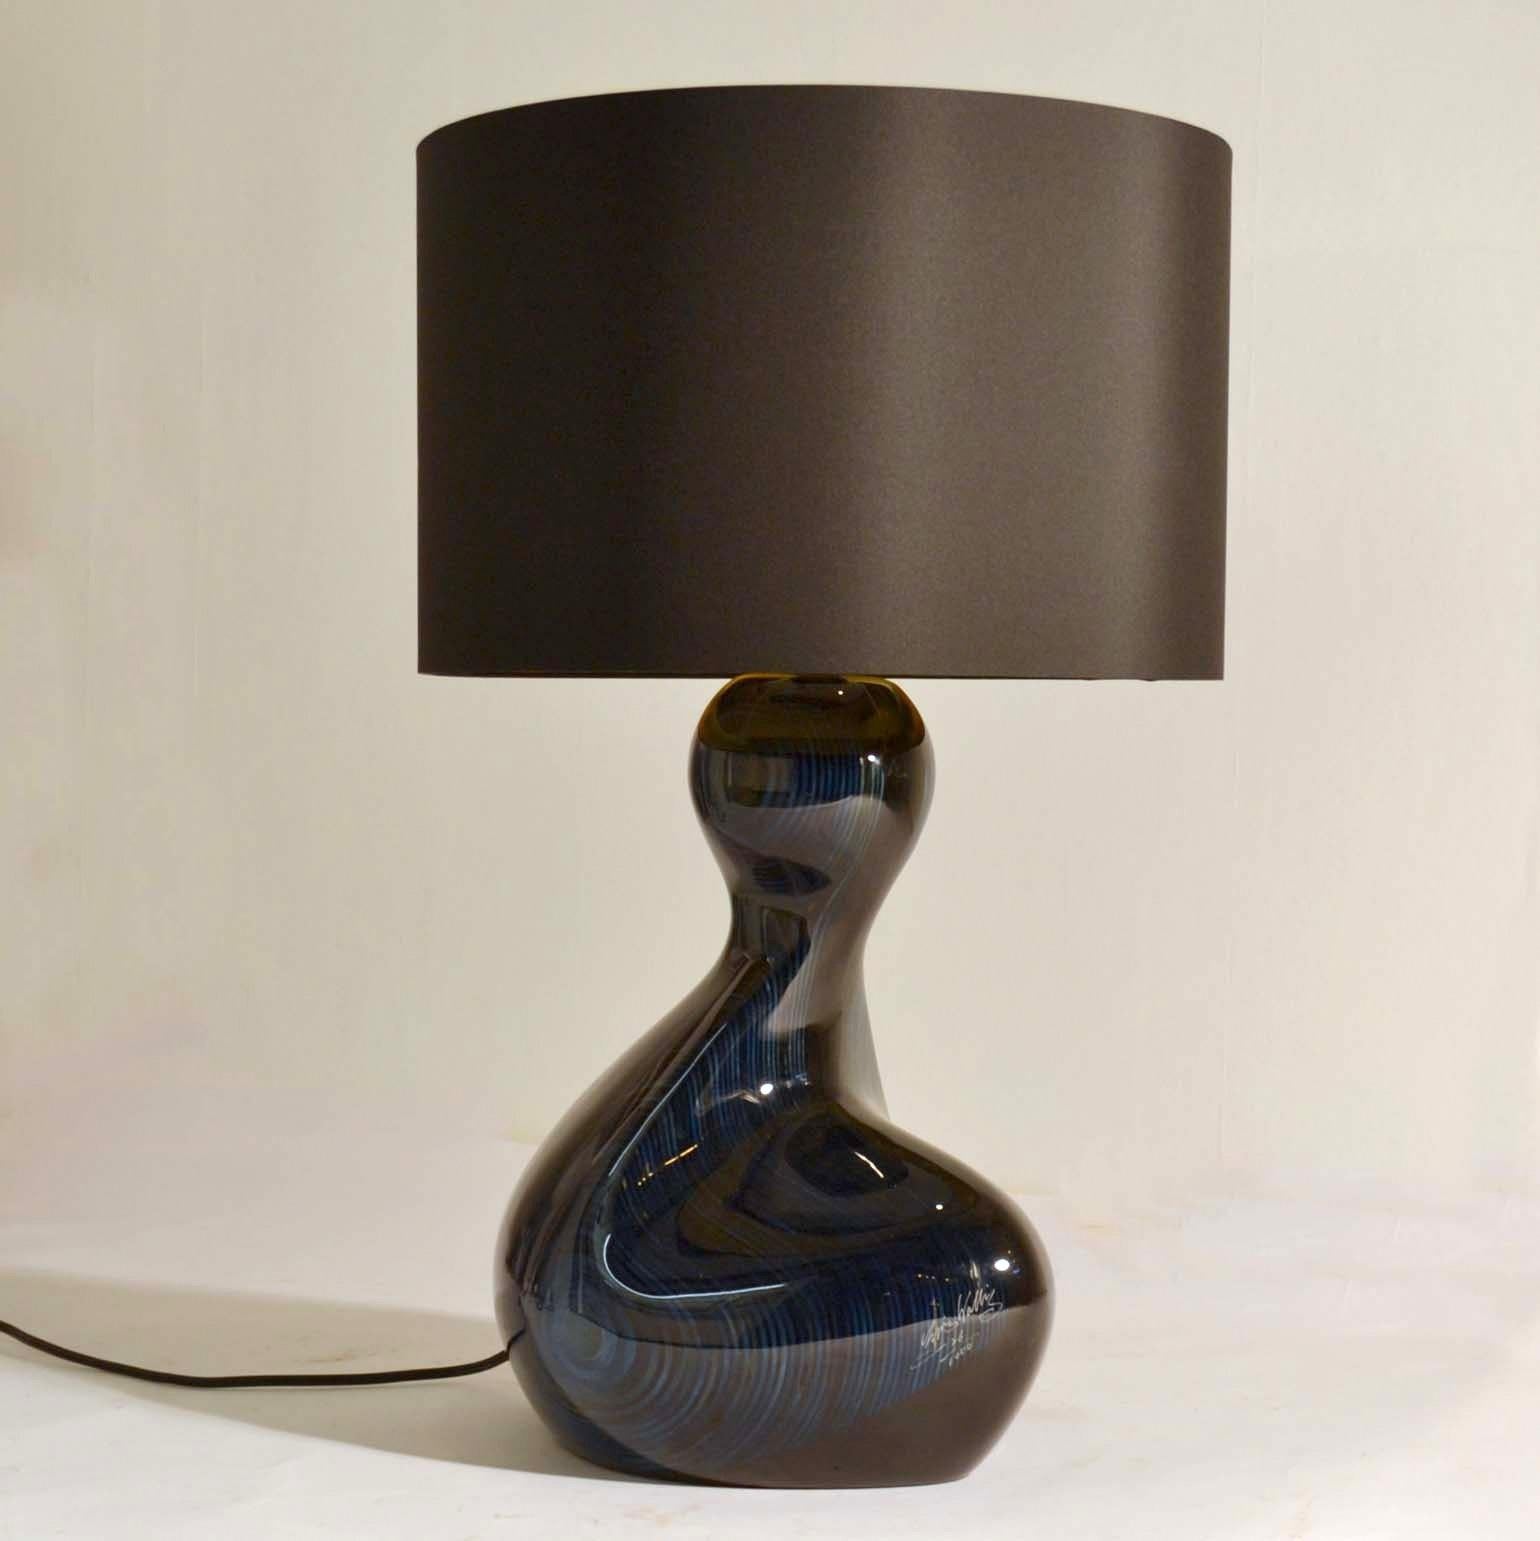 Contemporary Large Hand Carved Table Lamp in Deep Blue Wood, Black & Gold Shade